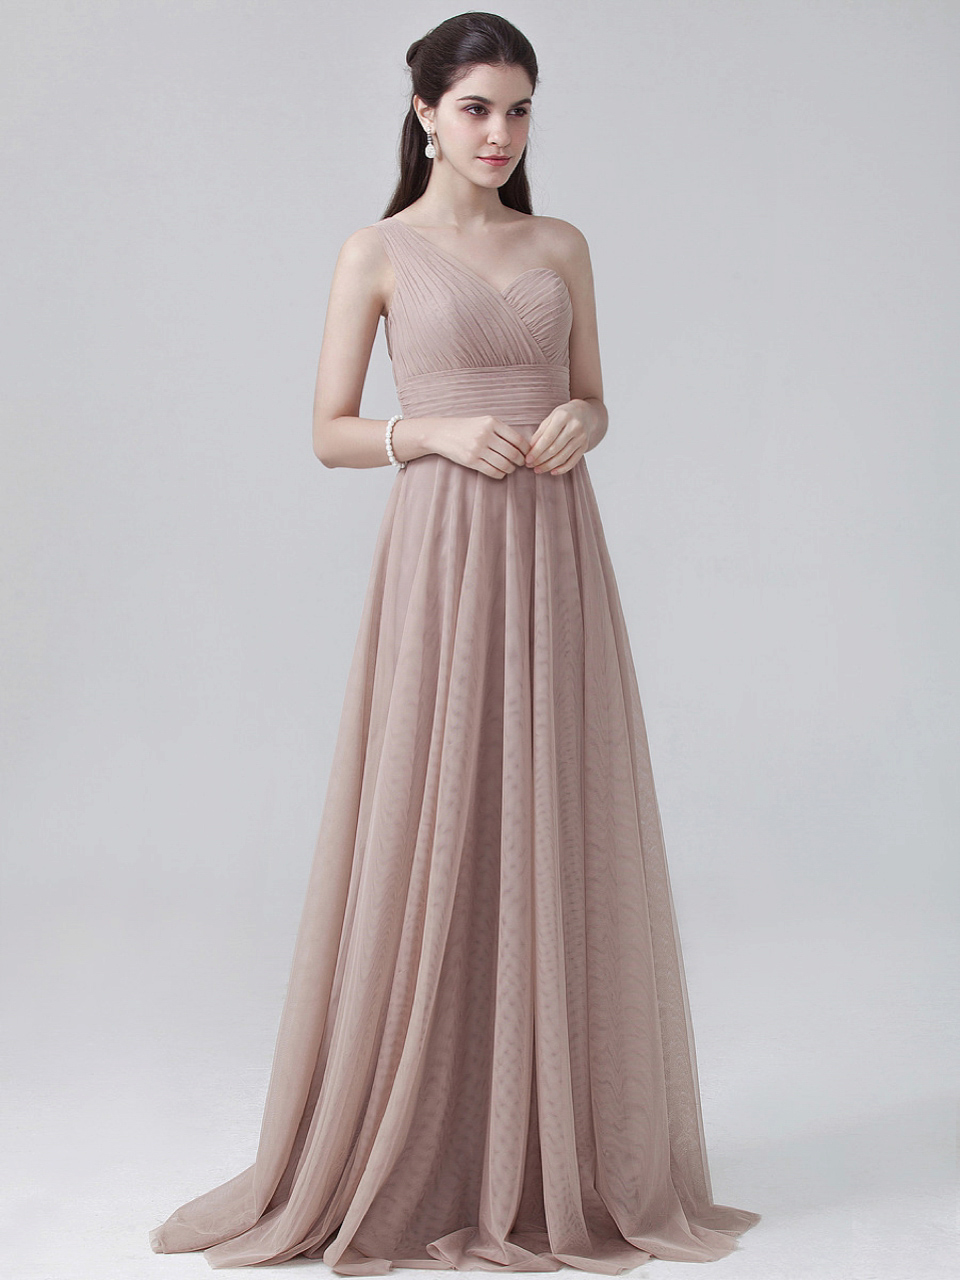 It's May sale time! Up to 30% off bridesmaids dresses from 'For Her And For Him'.